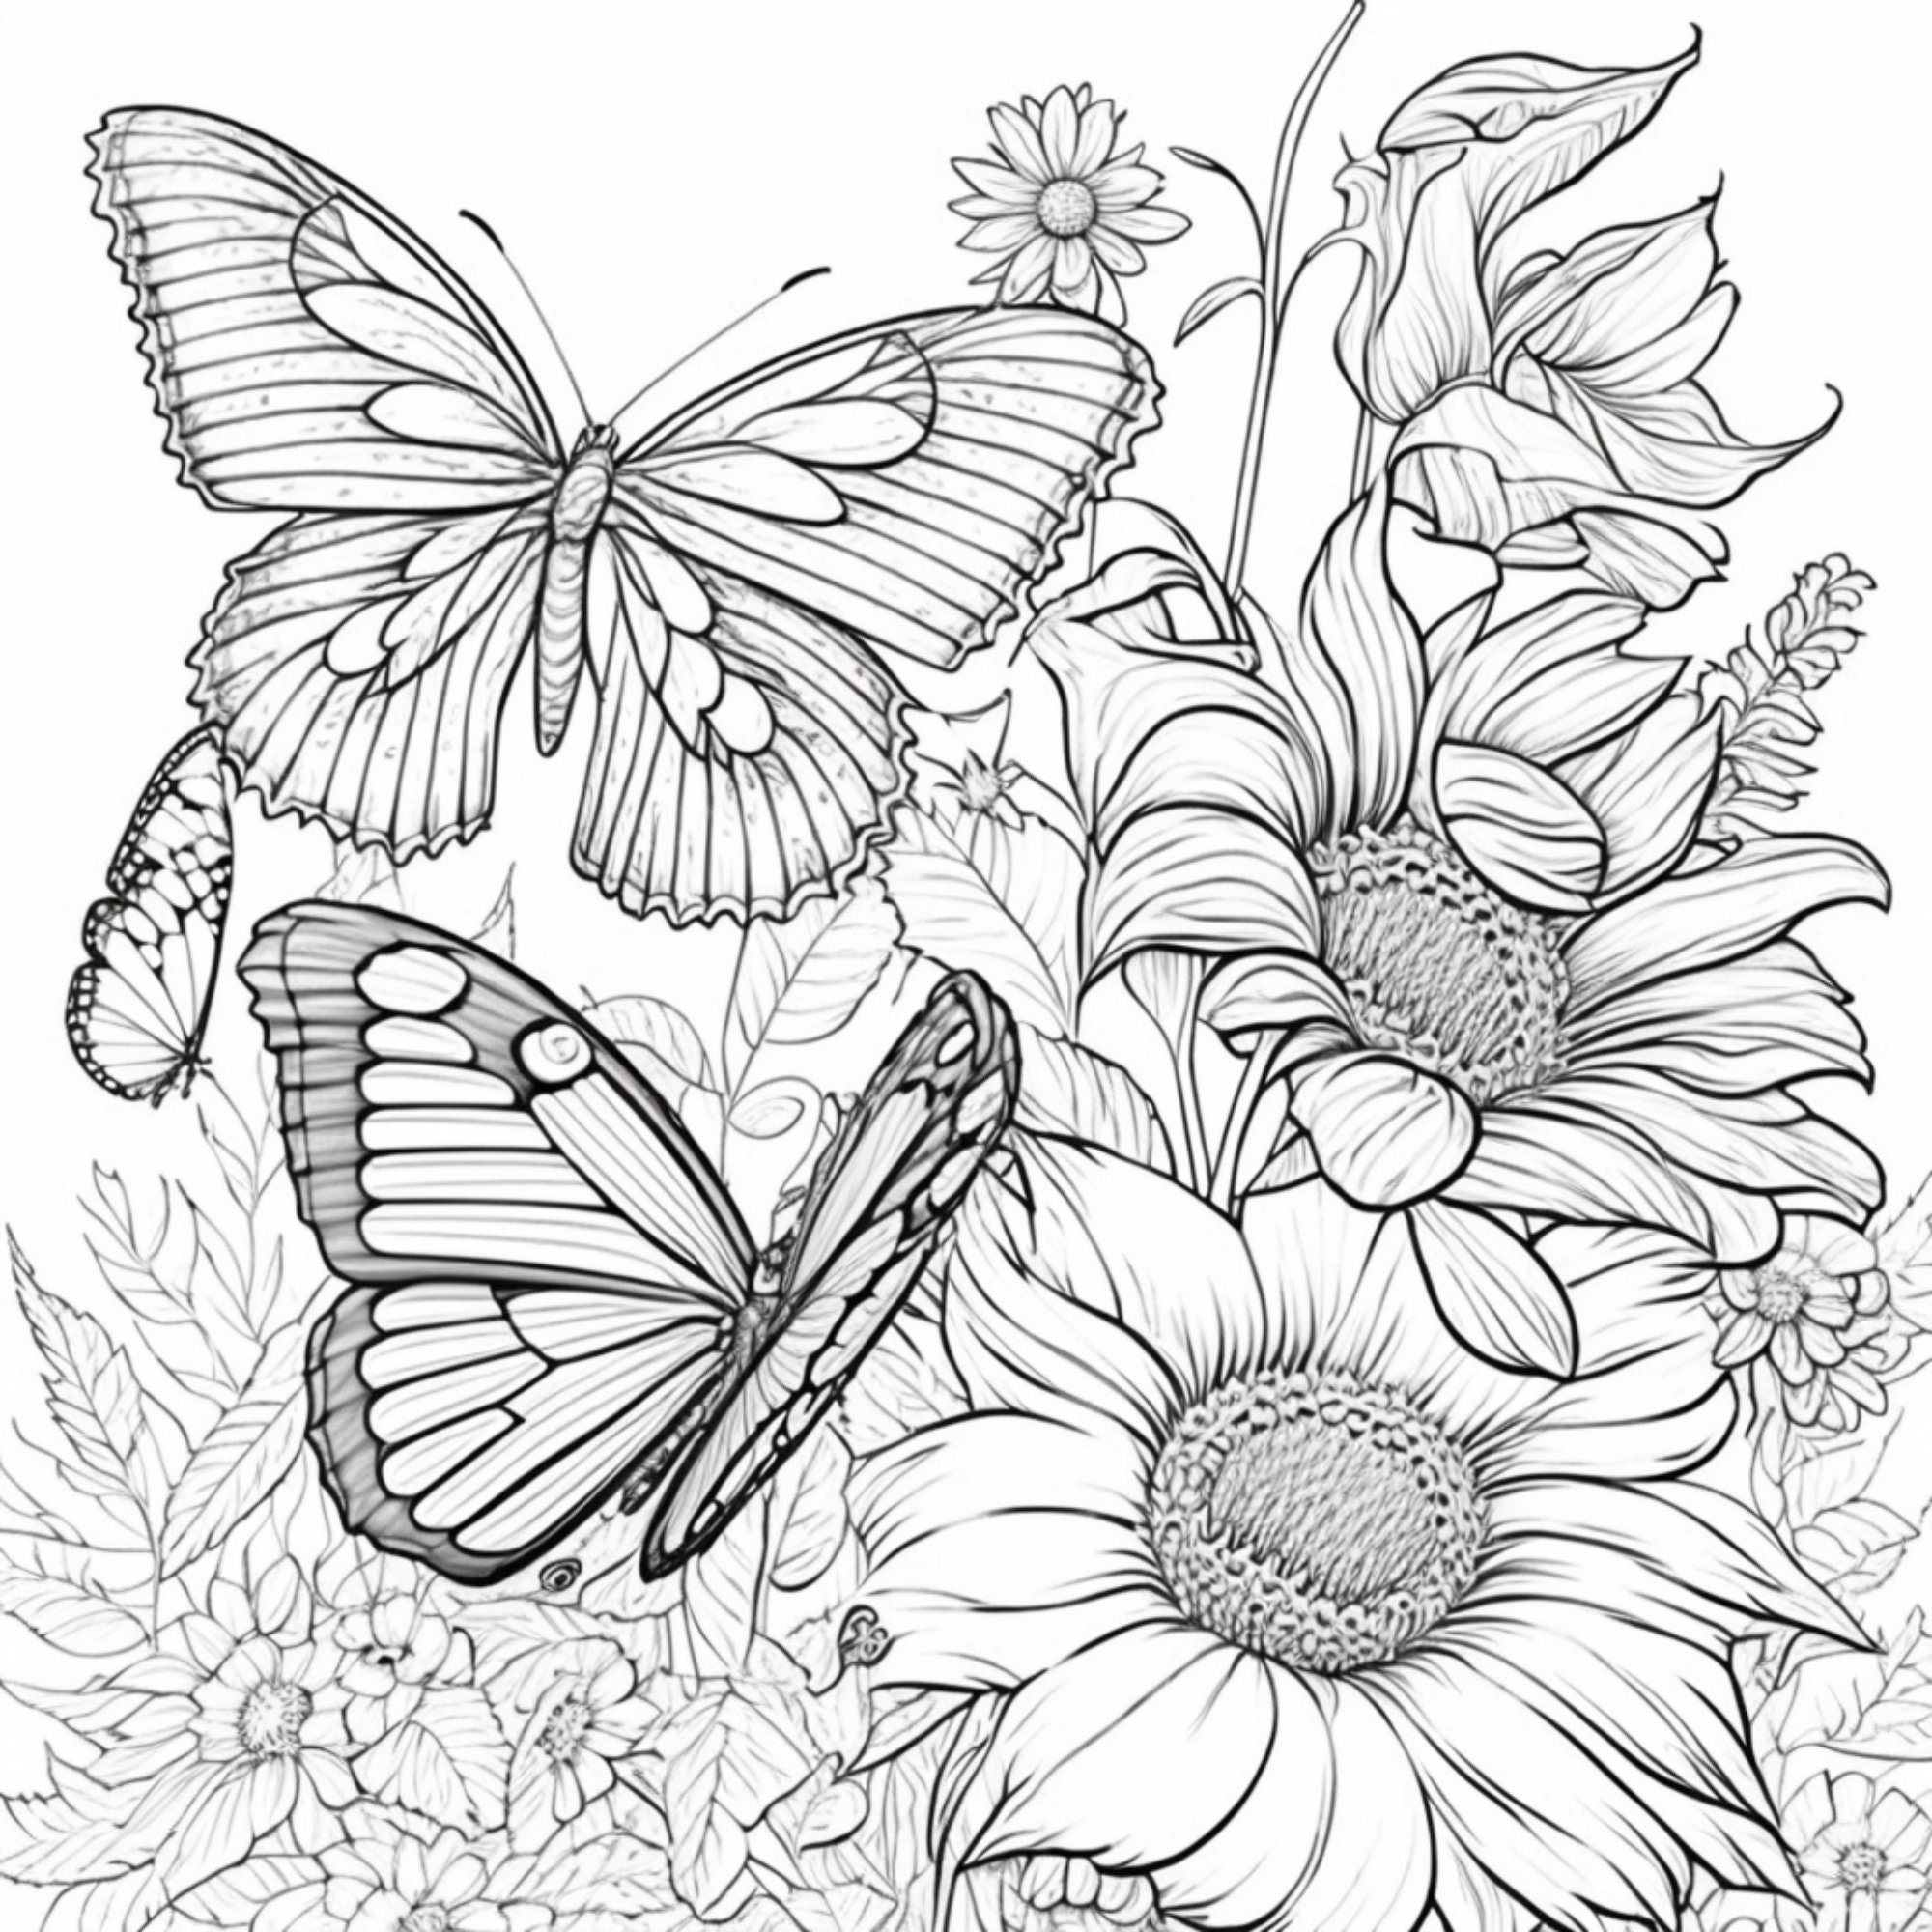 Printable flowers and butterflies coloring pages for kids and adults digital download pdf